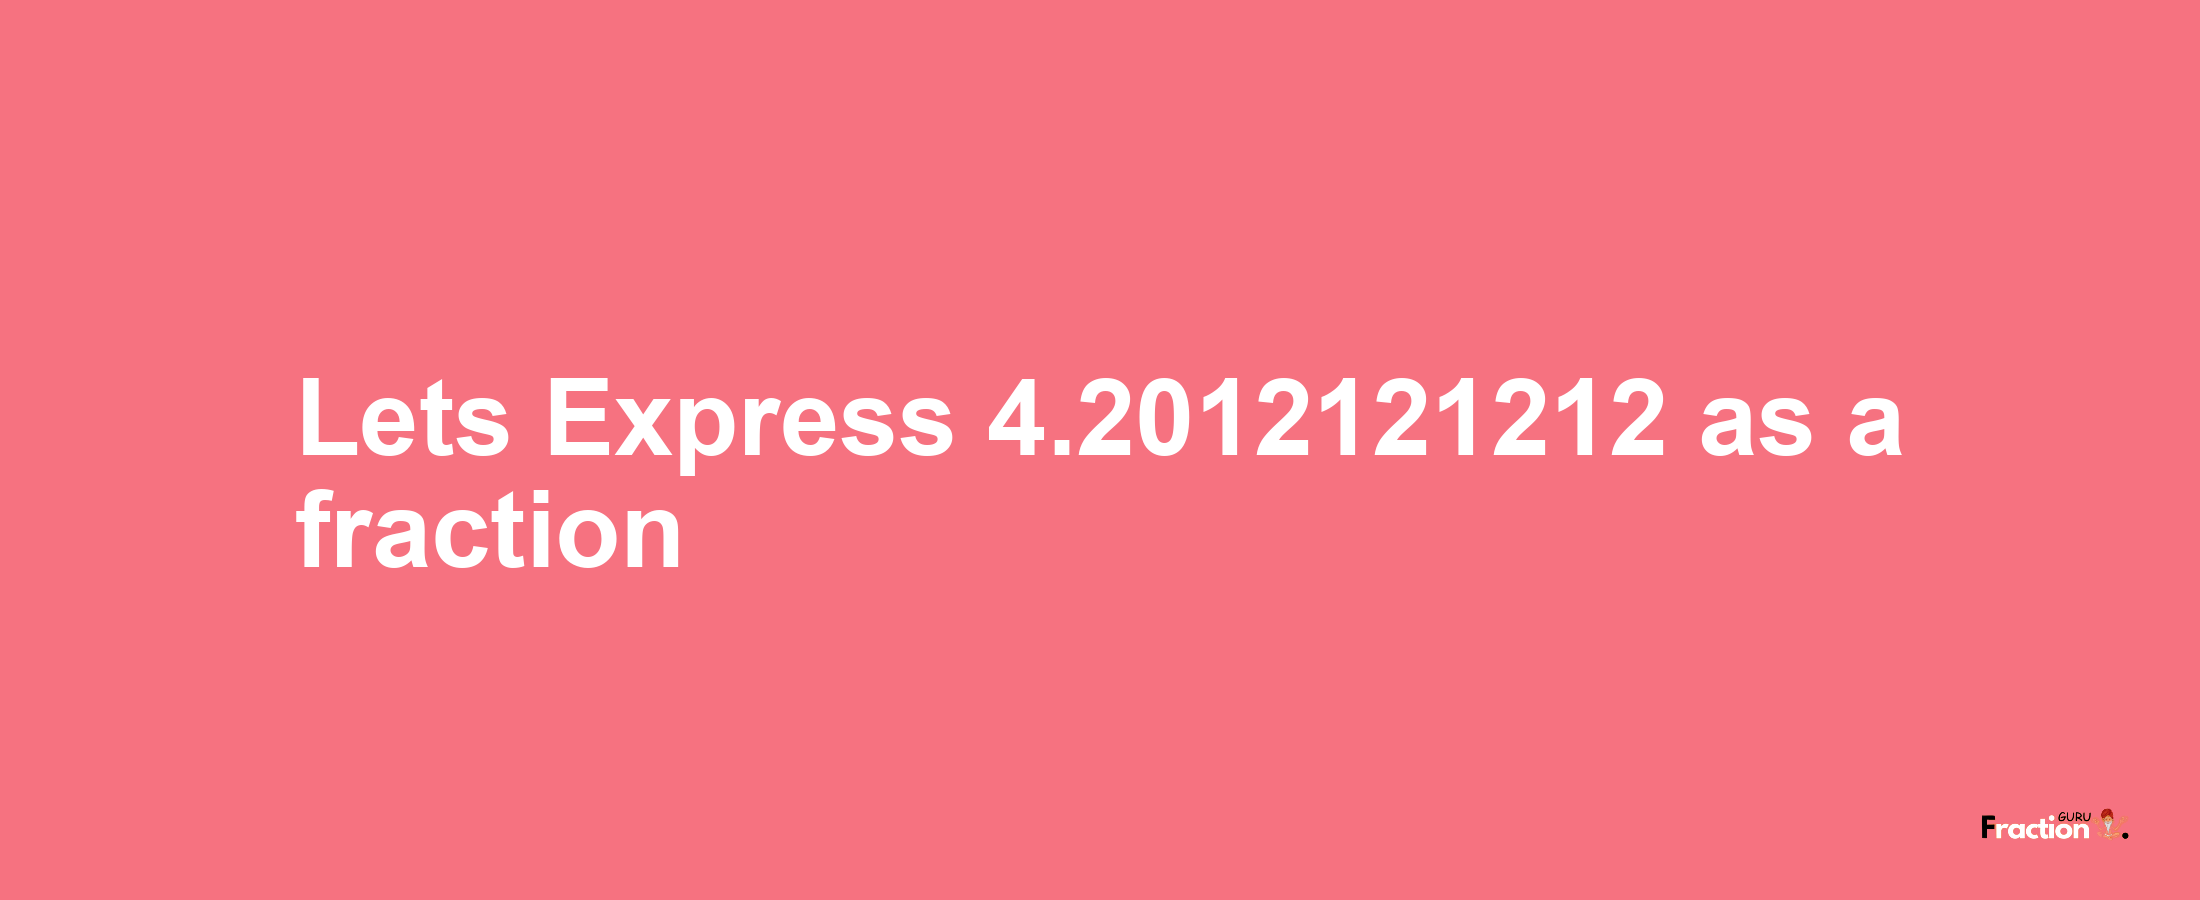 Lets Express 4.2012121212 as afraction